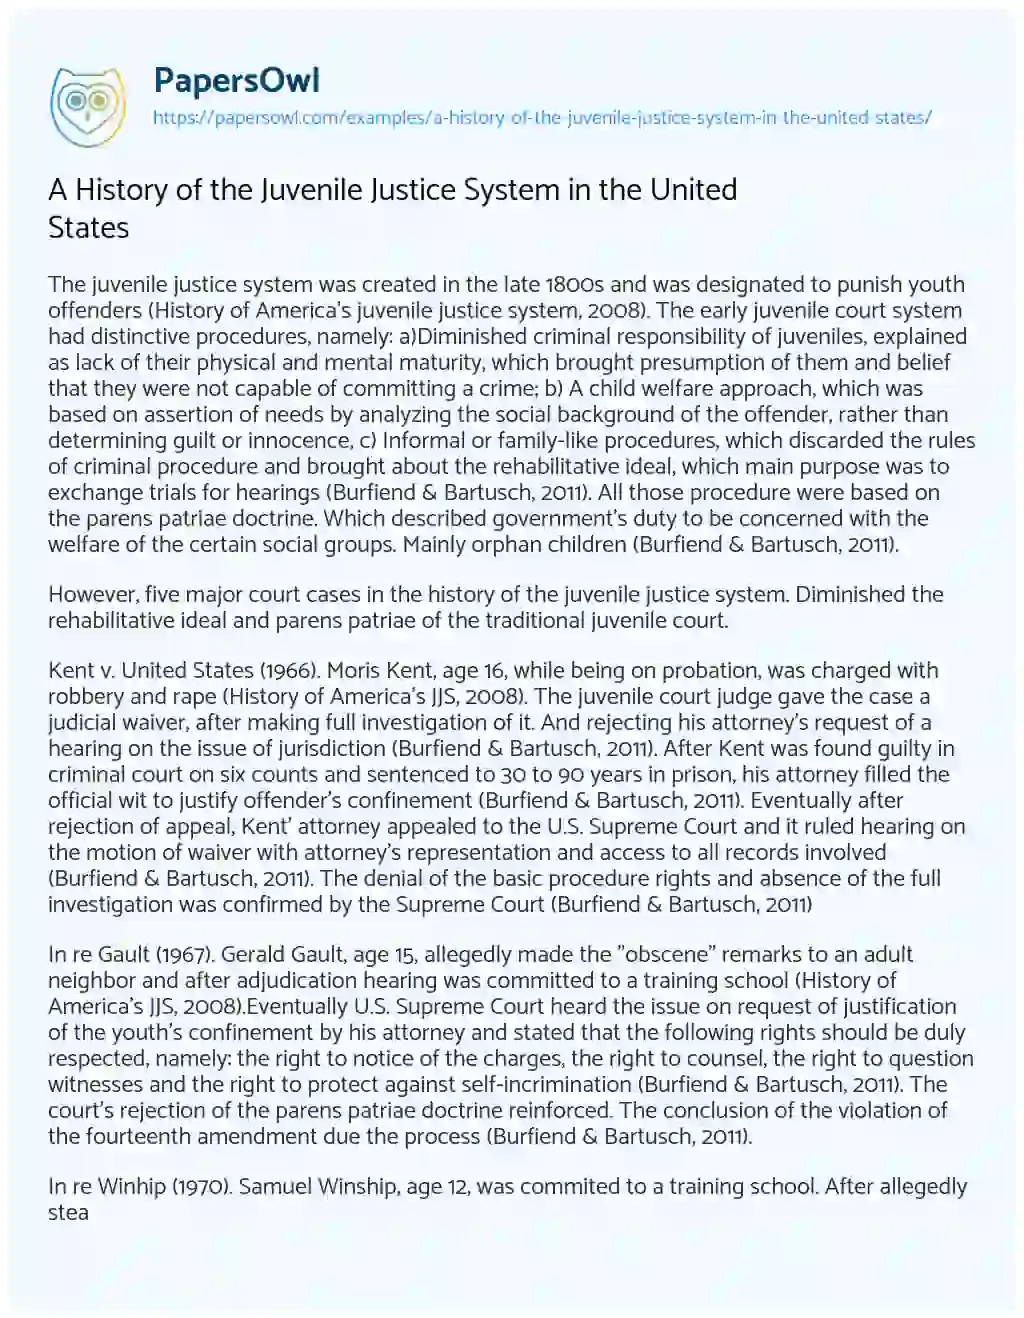 Essay on A History of the Juvenile Justice System in the United States